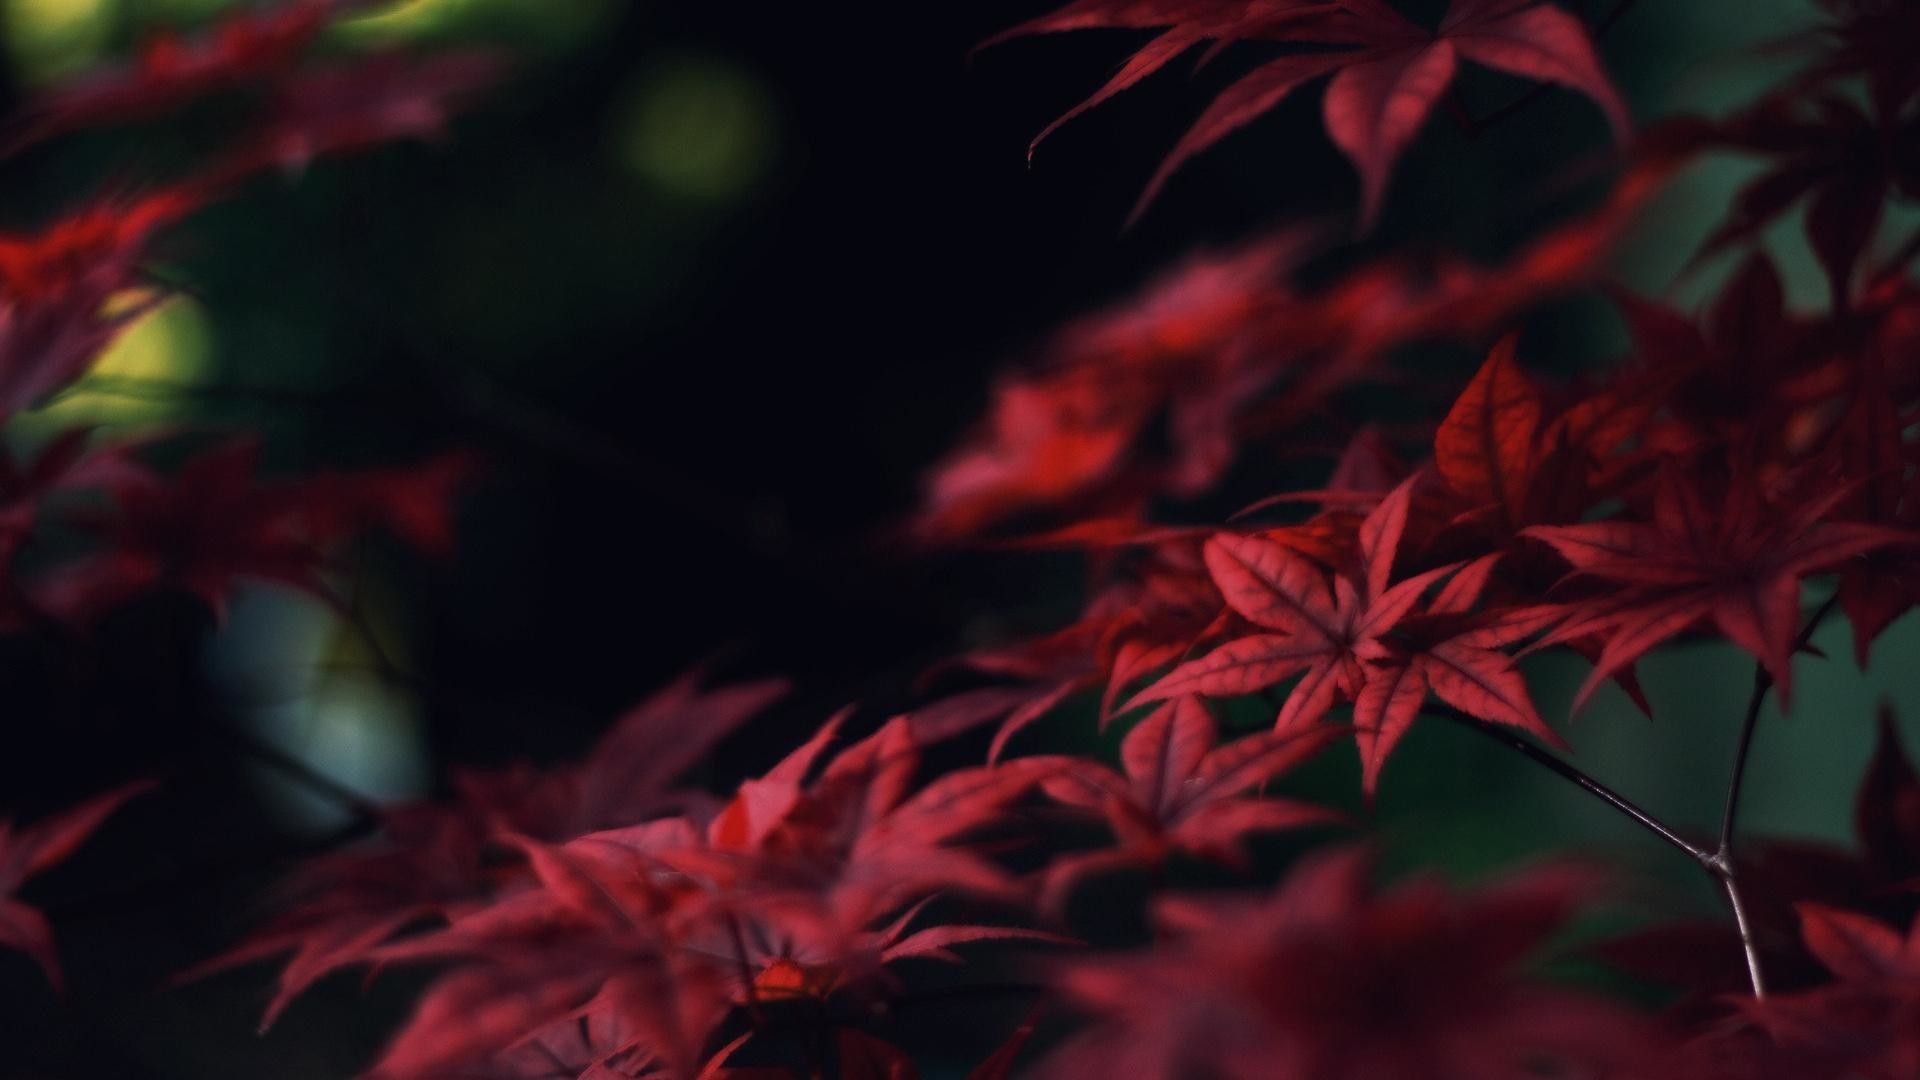 A close up of some red leaves - Crimson